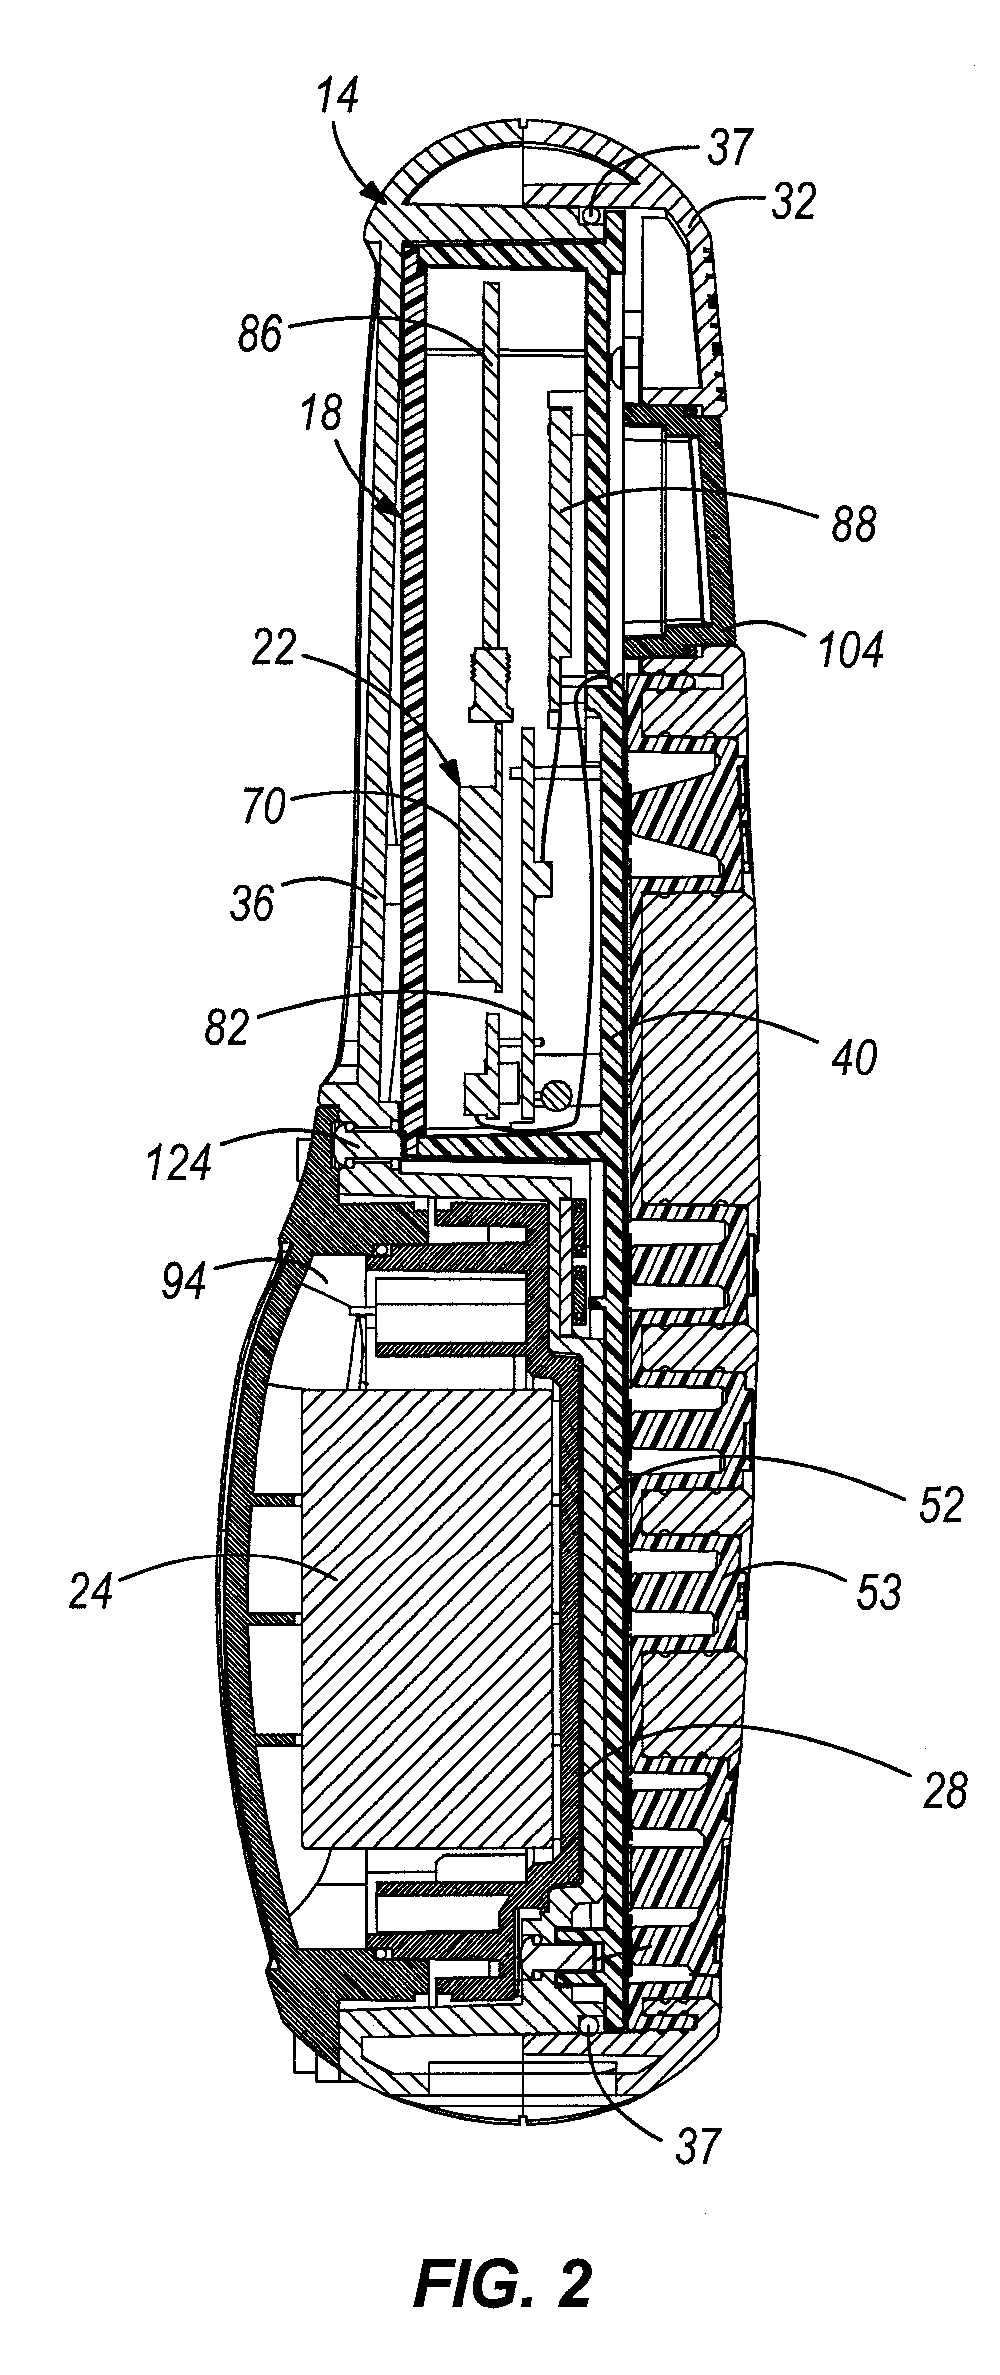 Device for use in an environment where flammable gases may be present